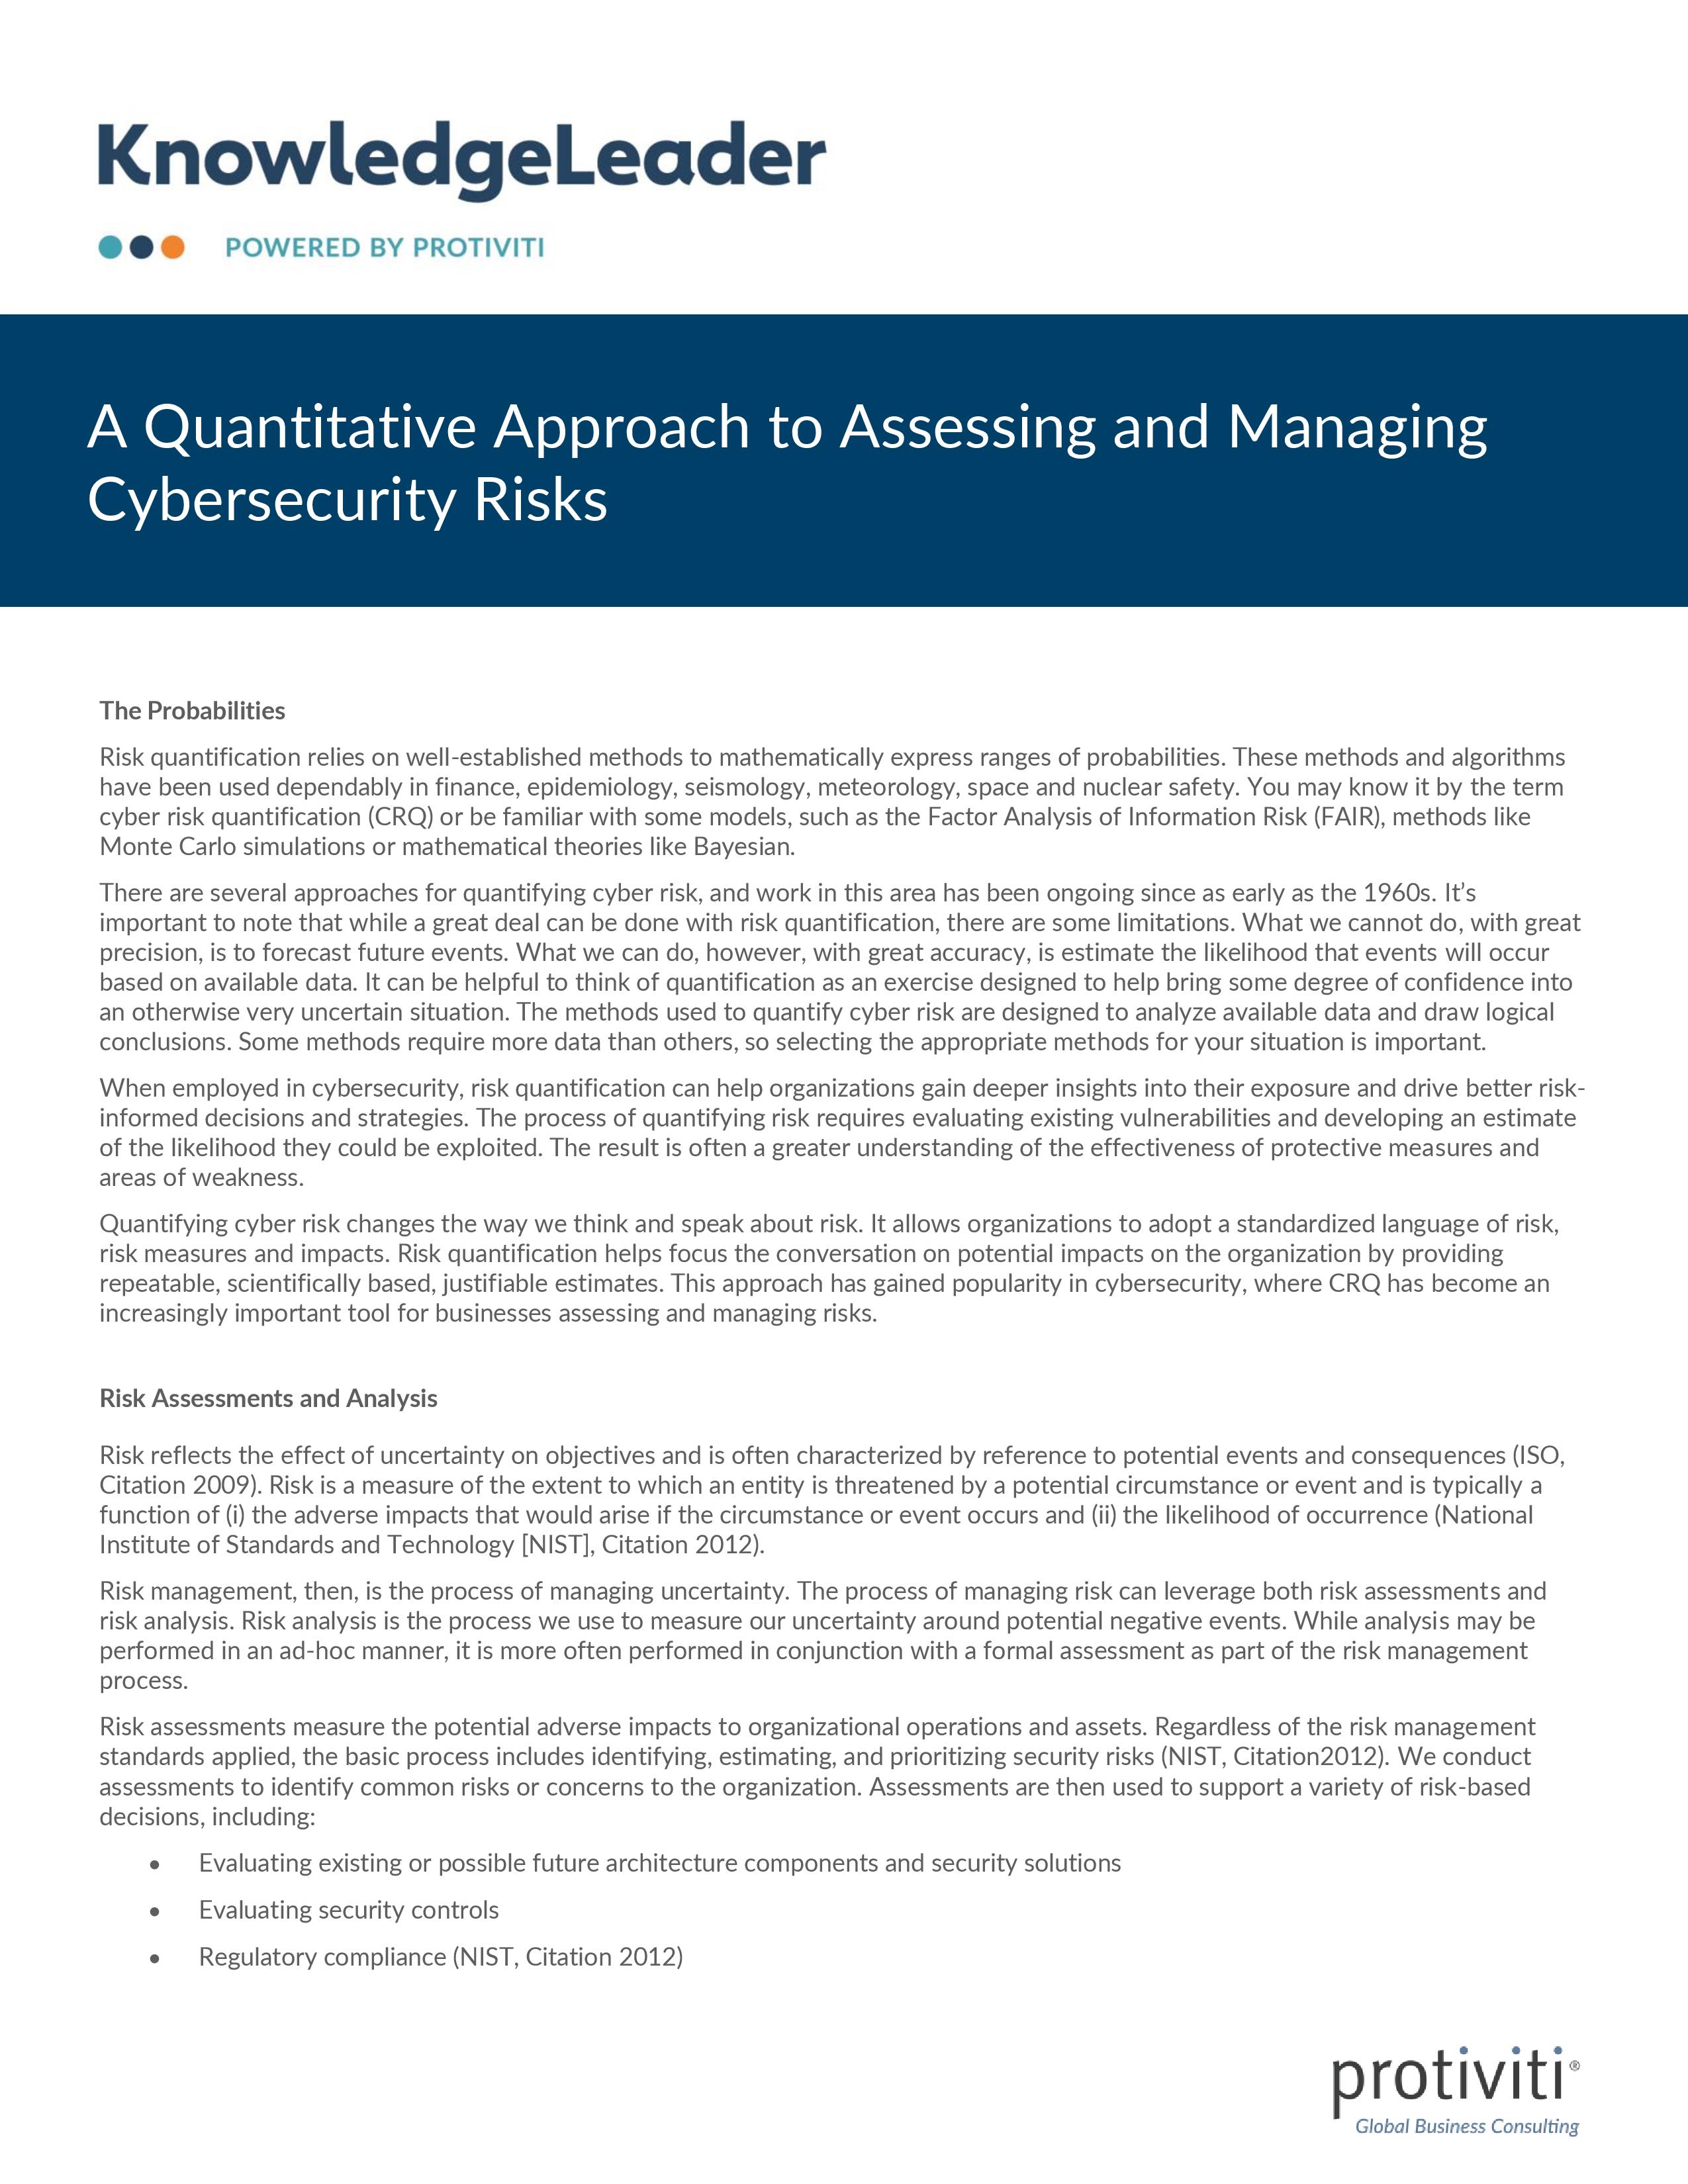 Screenshot of the first page of A Quantitative Approach to Assessing and Managing Cybersecurity Risks